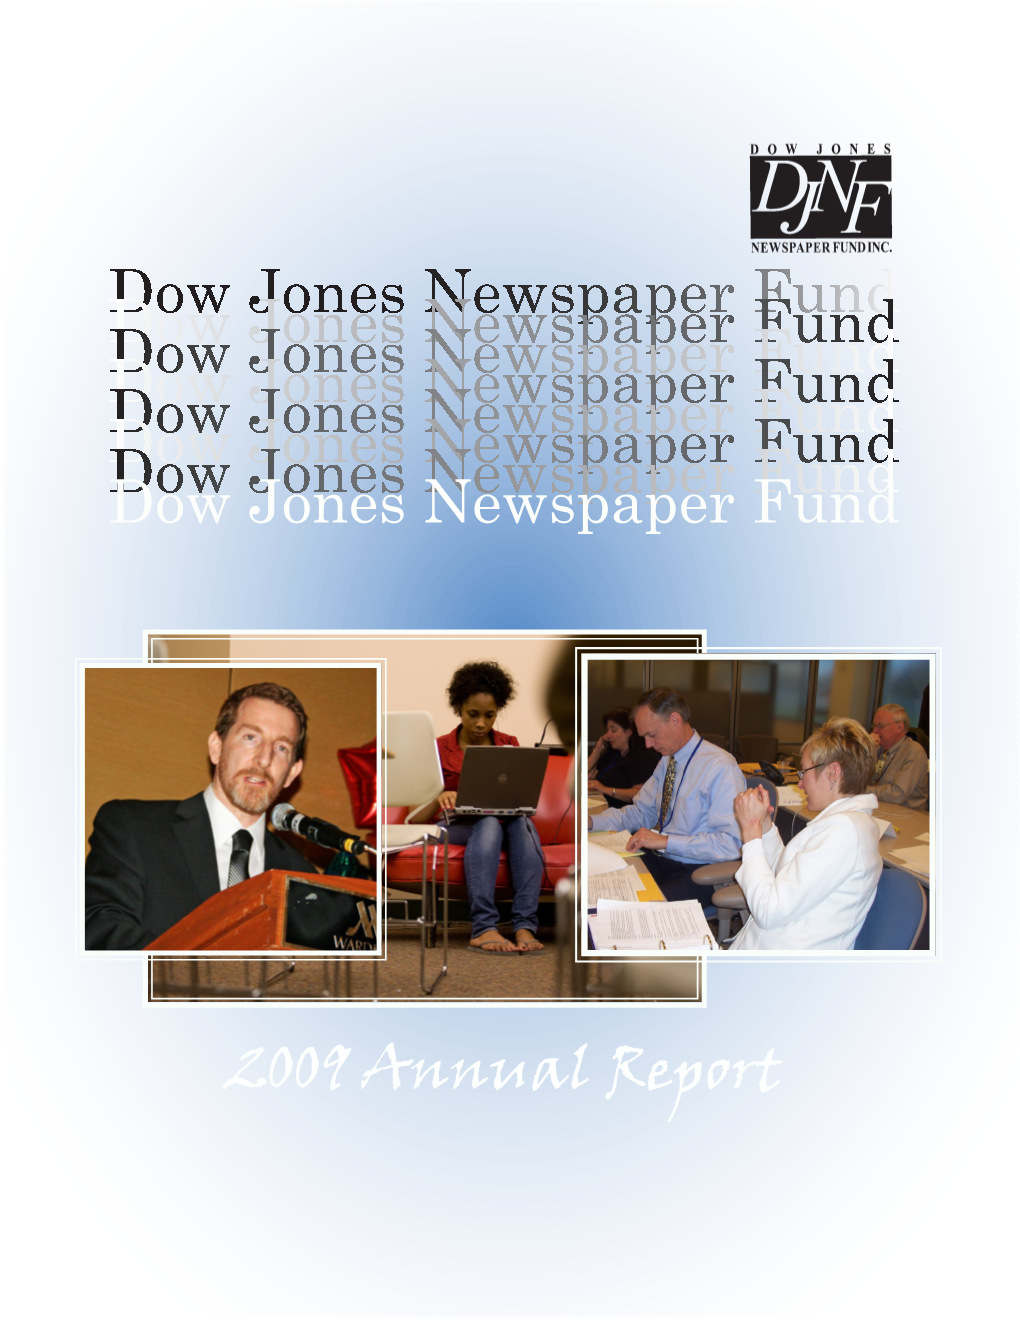 2009 Annual Report on the Cover